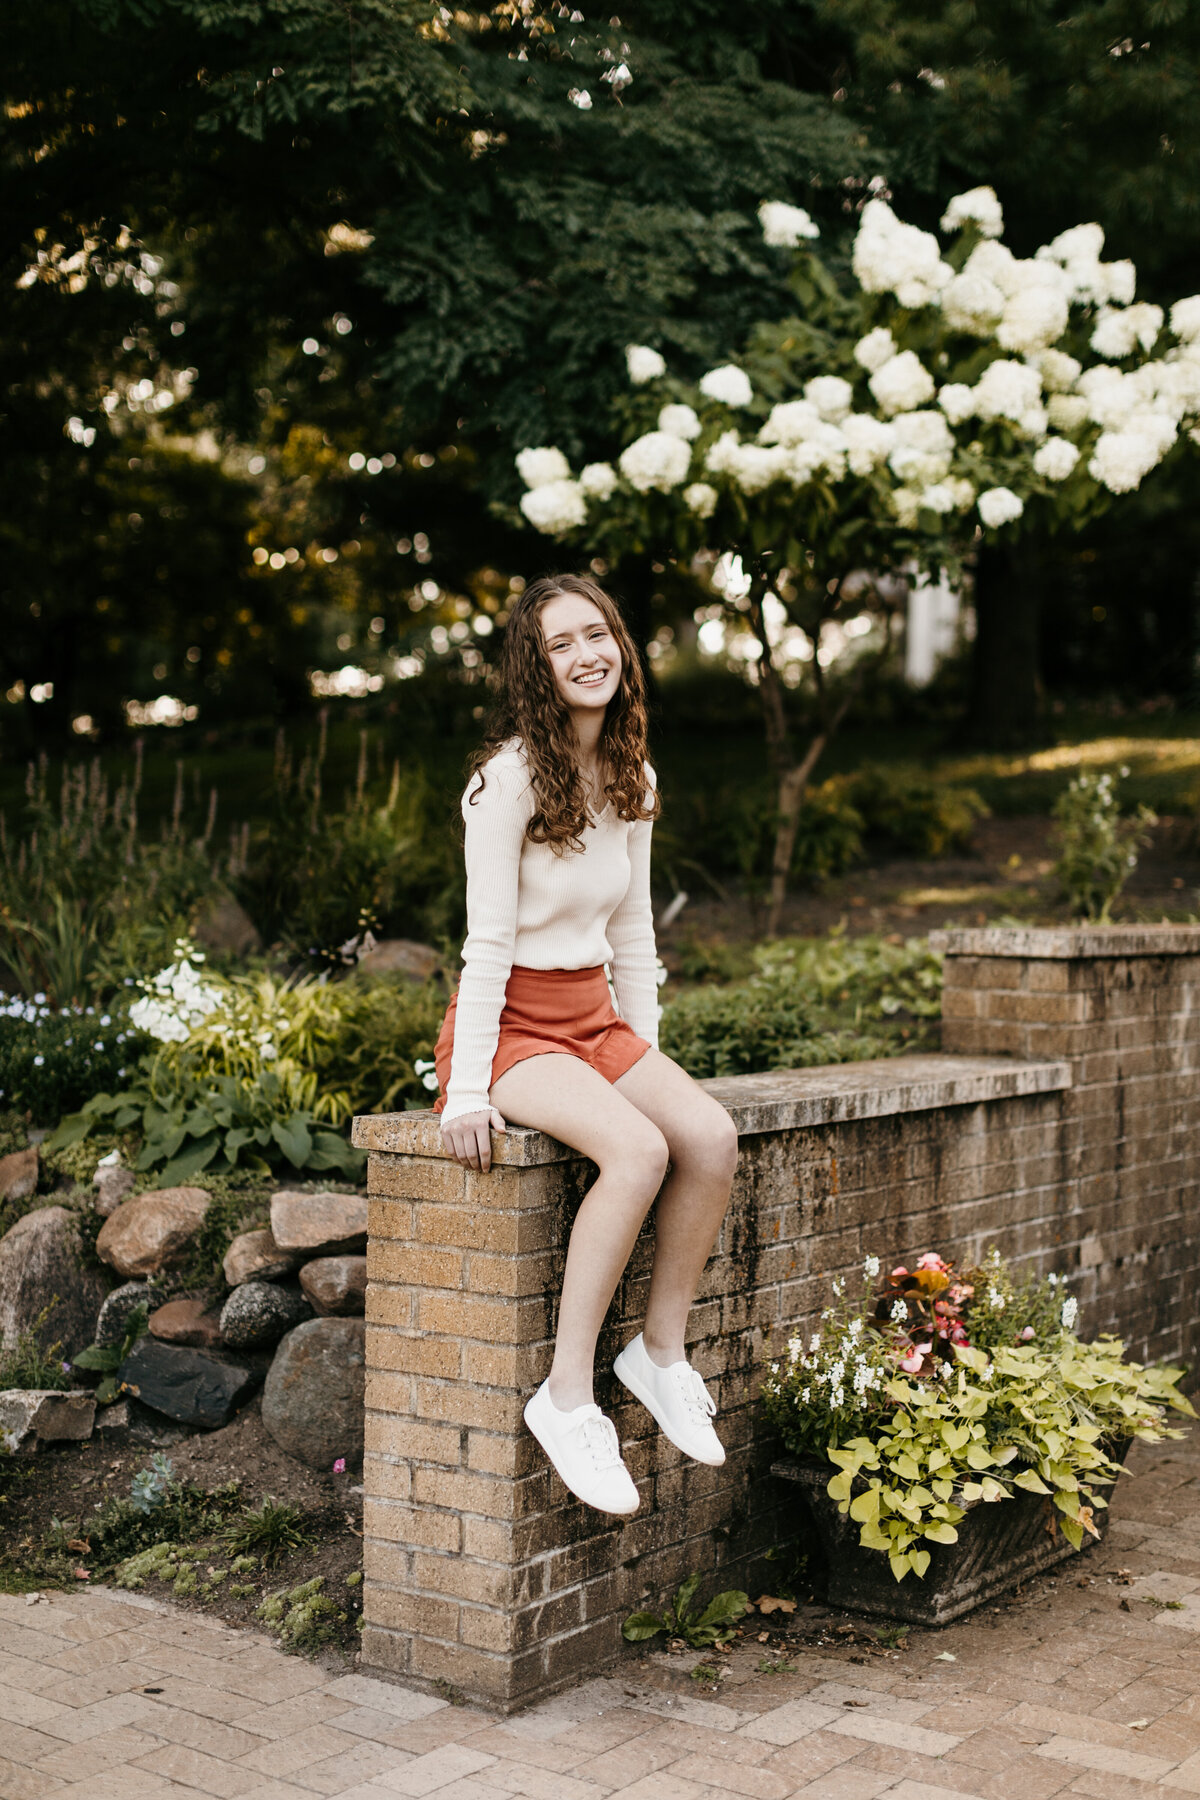 Polly-and-Celia-Noerenberg-Gardens-Kelsey-Heeter-Photography-Preview-75 (1)